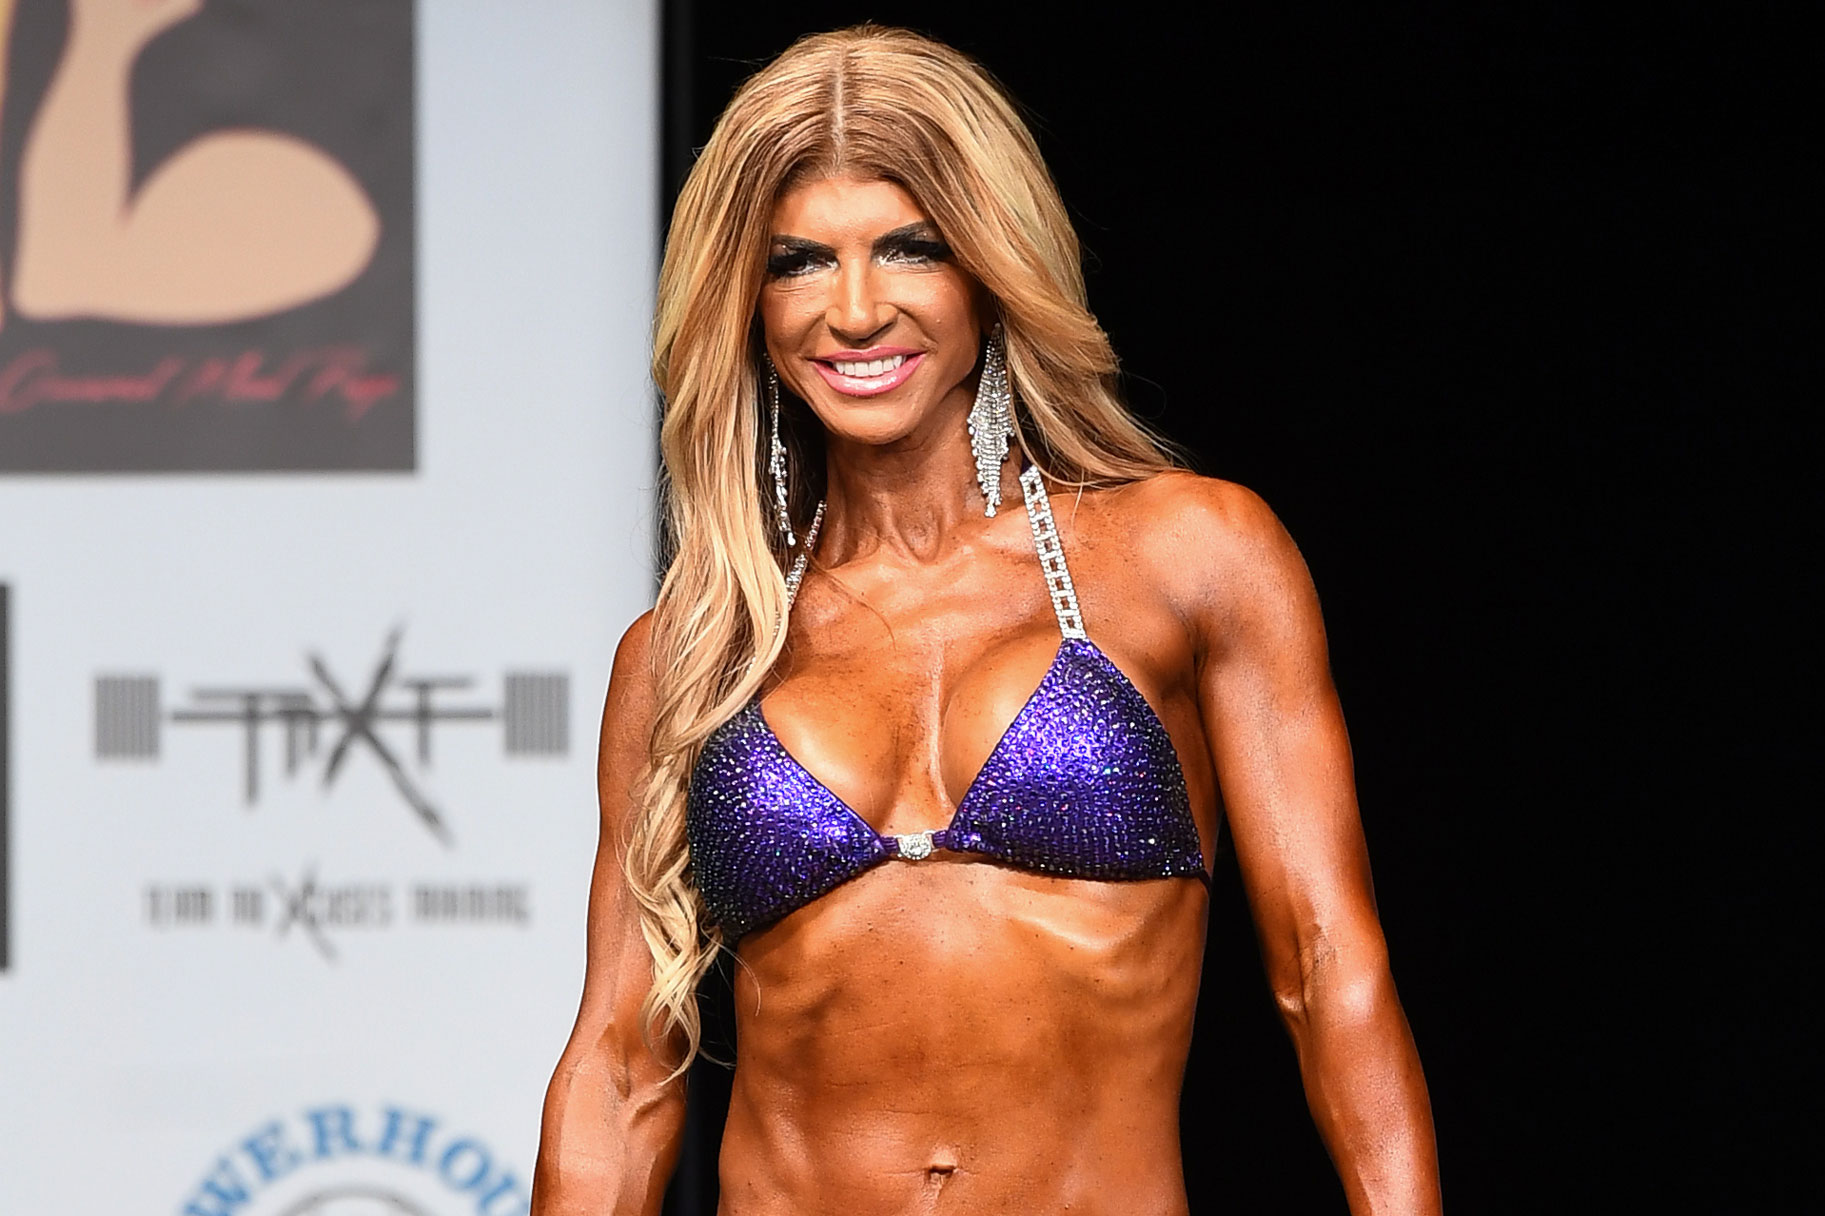 Did Teresa Giudice Do More Than Work Out To Achieve Fit Figure? She  Reportedly Received AirSculpt Procedure